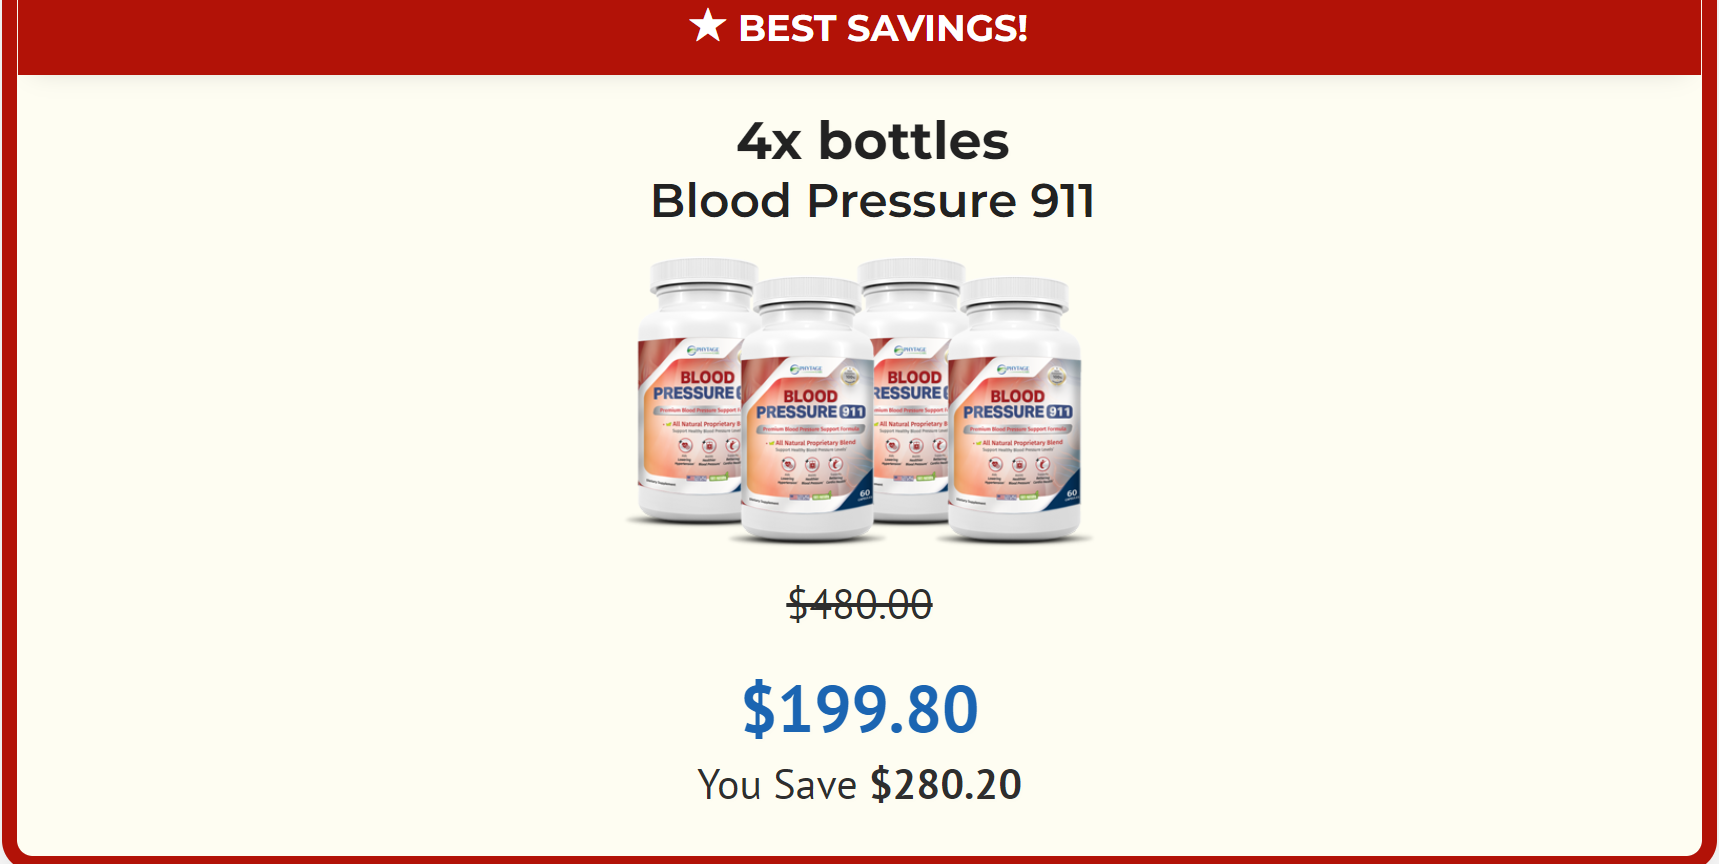 Blood Pressure 911: Reviews (Blood Pressure 911 USA, Canada, UK & Australia) Manage BP Day To Day, Official Price!